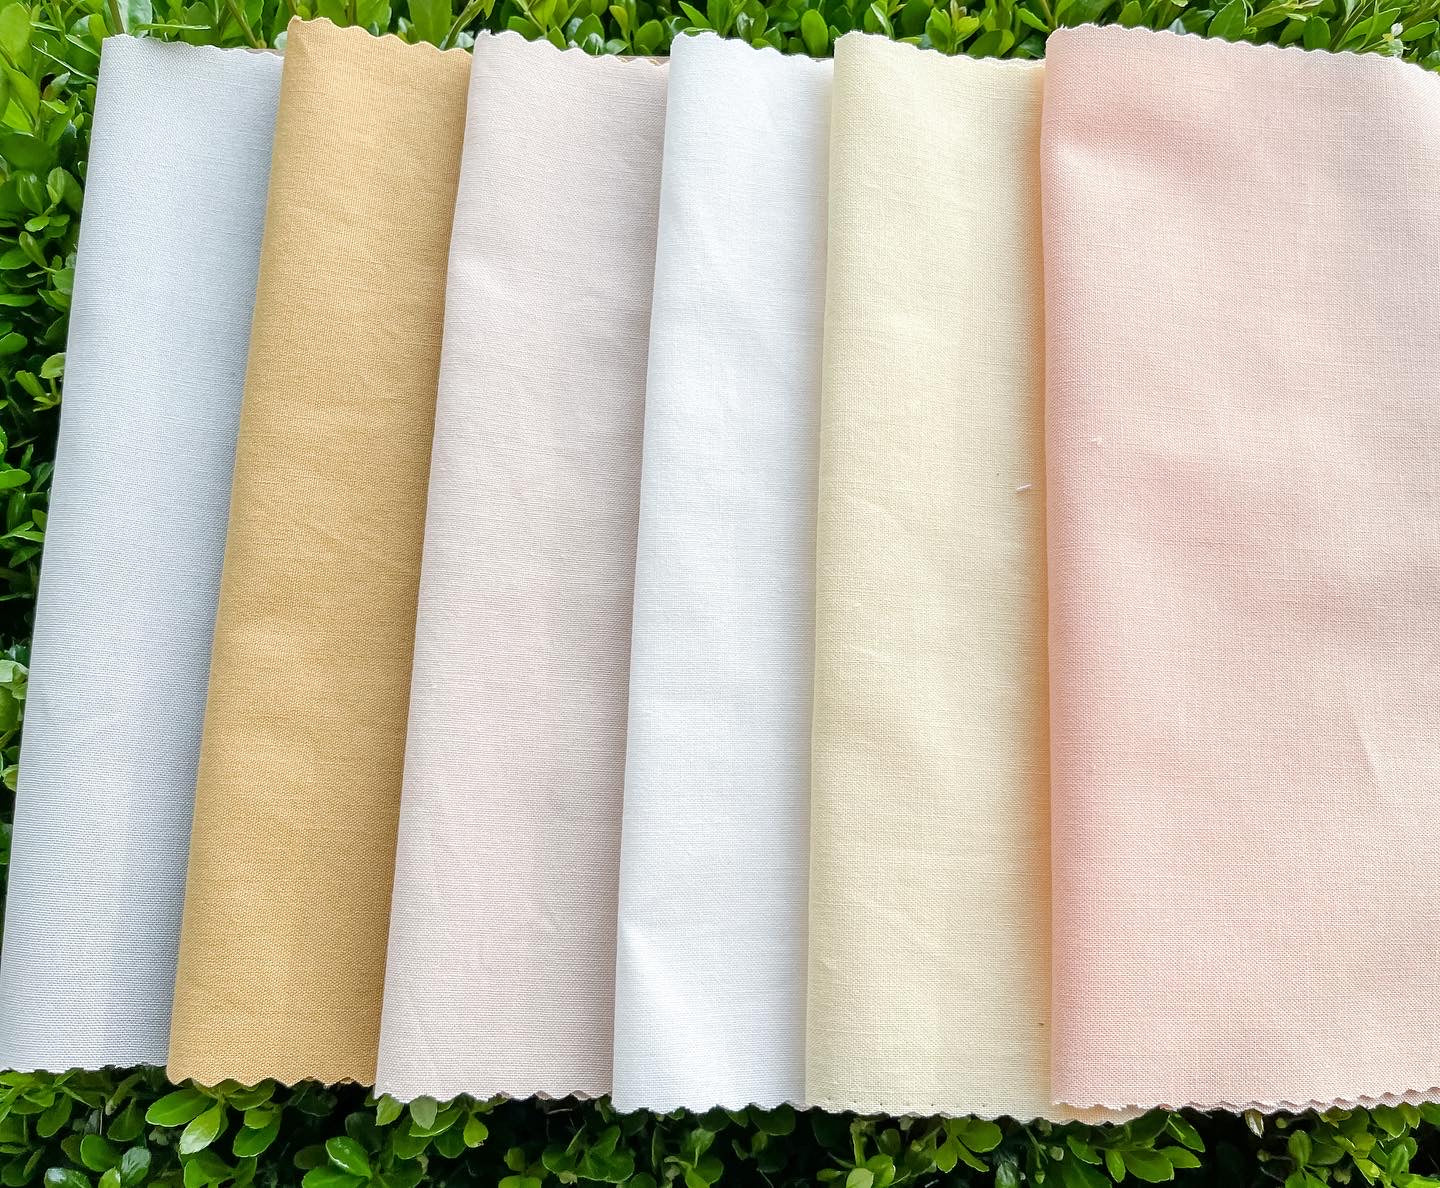 12 Pcs/Set Embroidery Fabric, Linen Fabric for Embroidery Linen Embroidery  Fabric Squares Embroidery Needlework Cloth Fabric with 100 Skeins